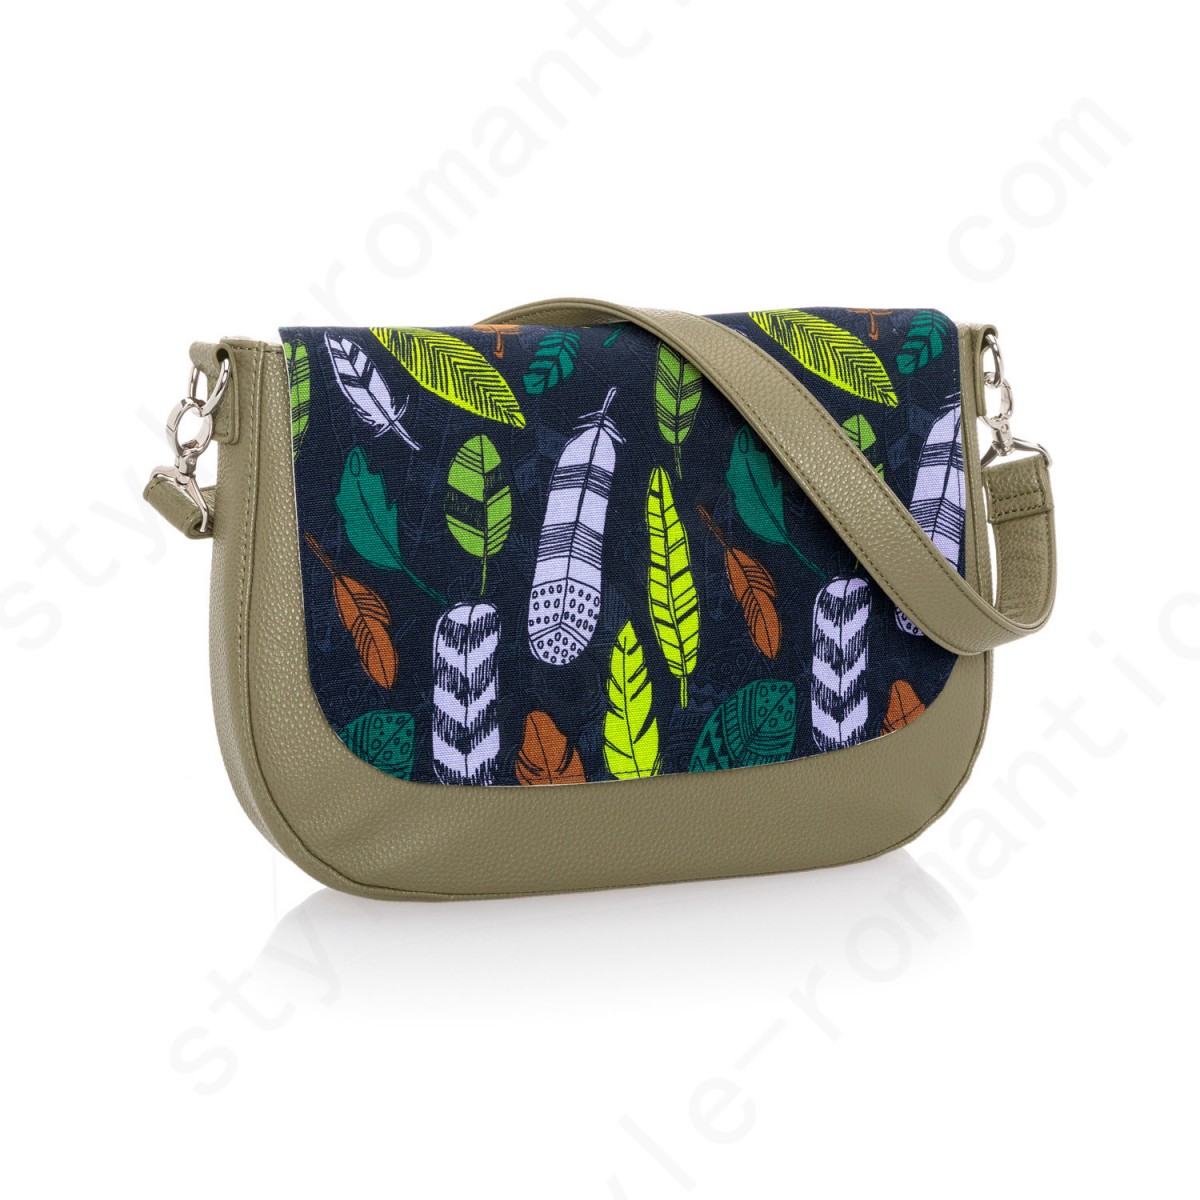 Thirty-One Gifts Studio Thirty-One Classic - Ooh-La-La Olive Pebble W/ Falling Feathers Bag Accessories - -0